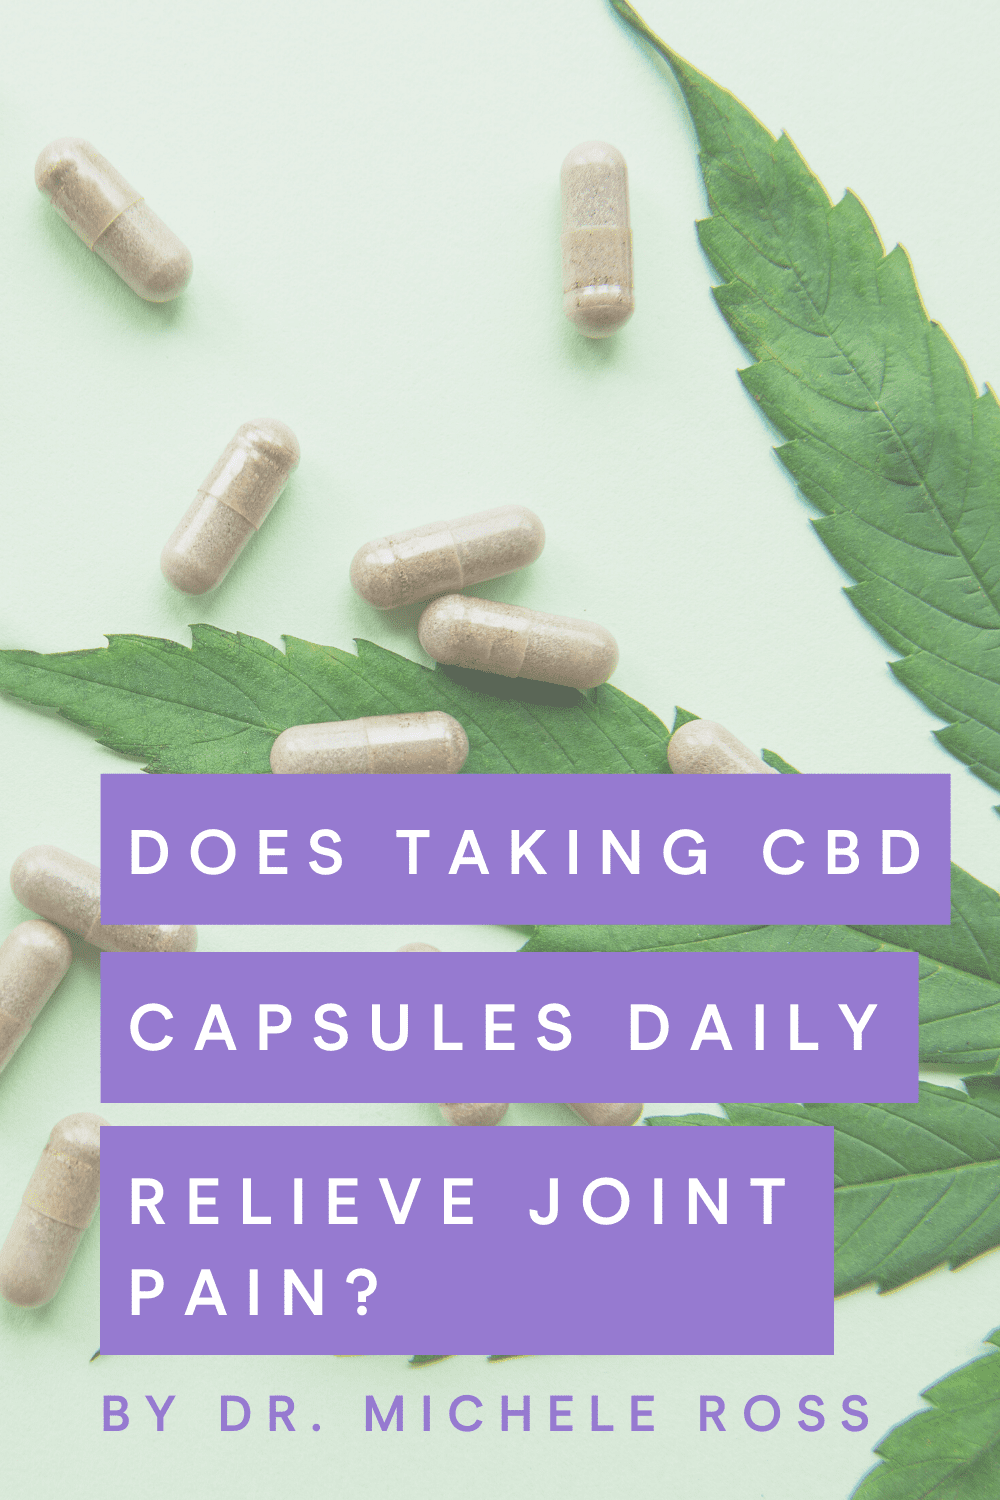 Does Taking CBD Capsules Daily Help In Relieving Joint Pain?